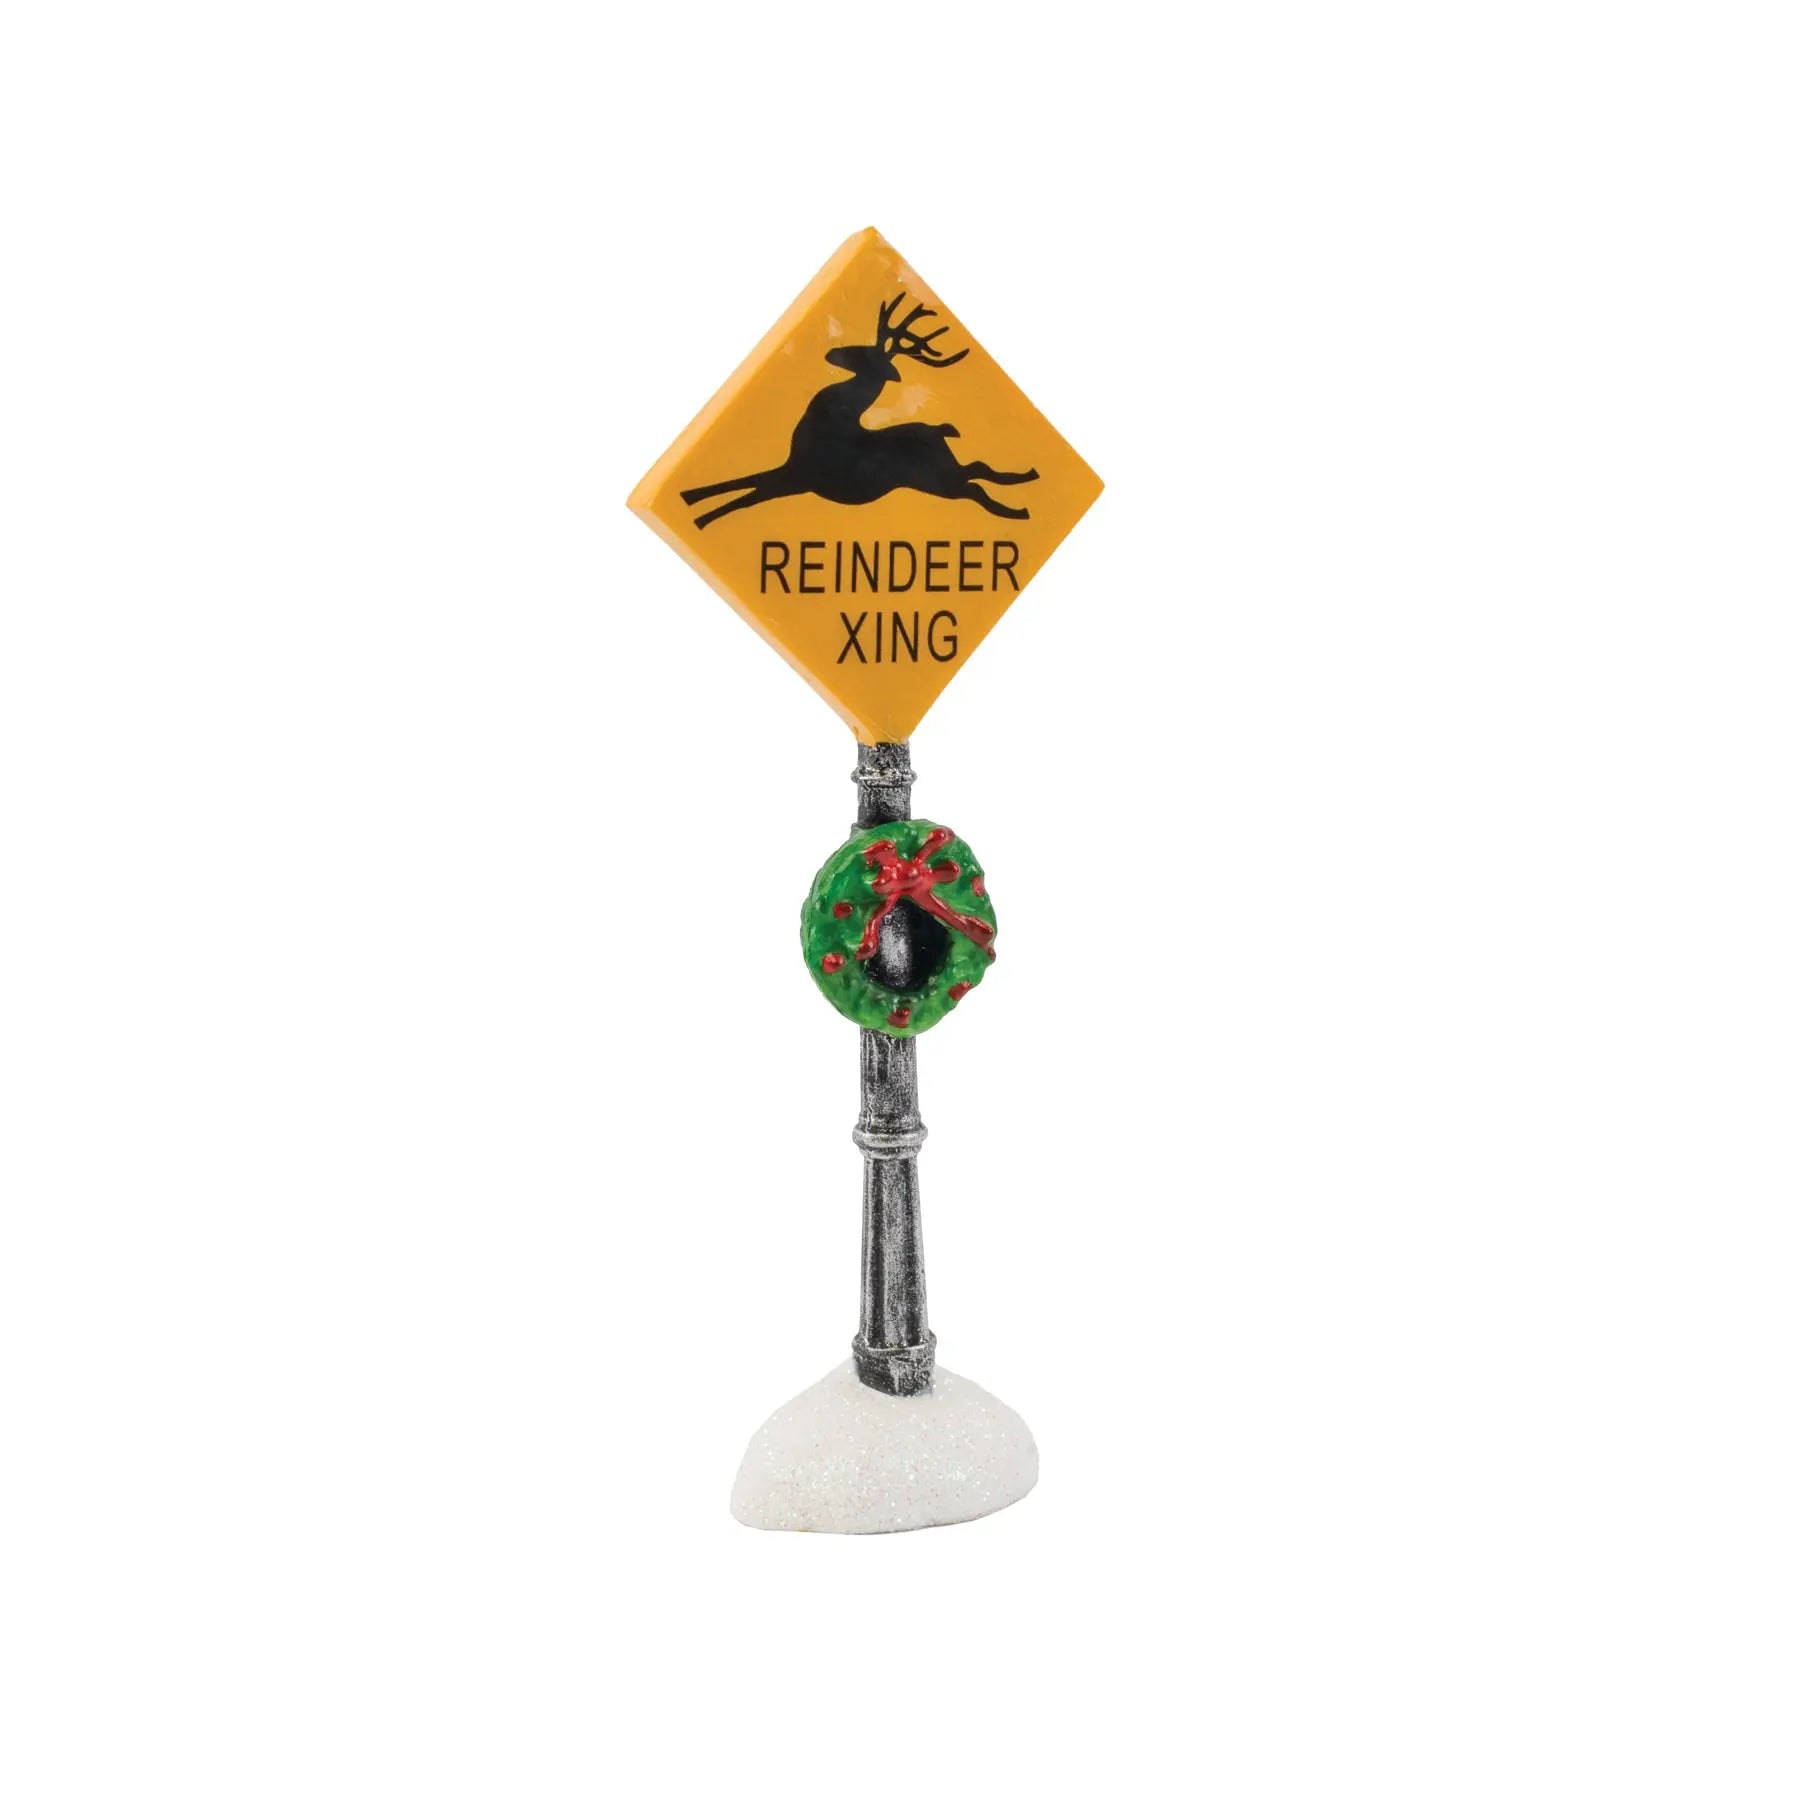 Reindeer Xing Sign fgsquarevillage